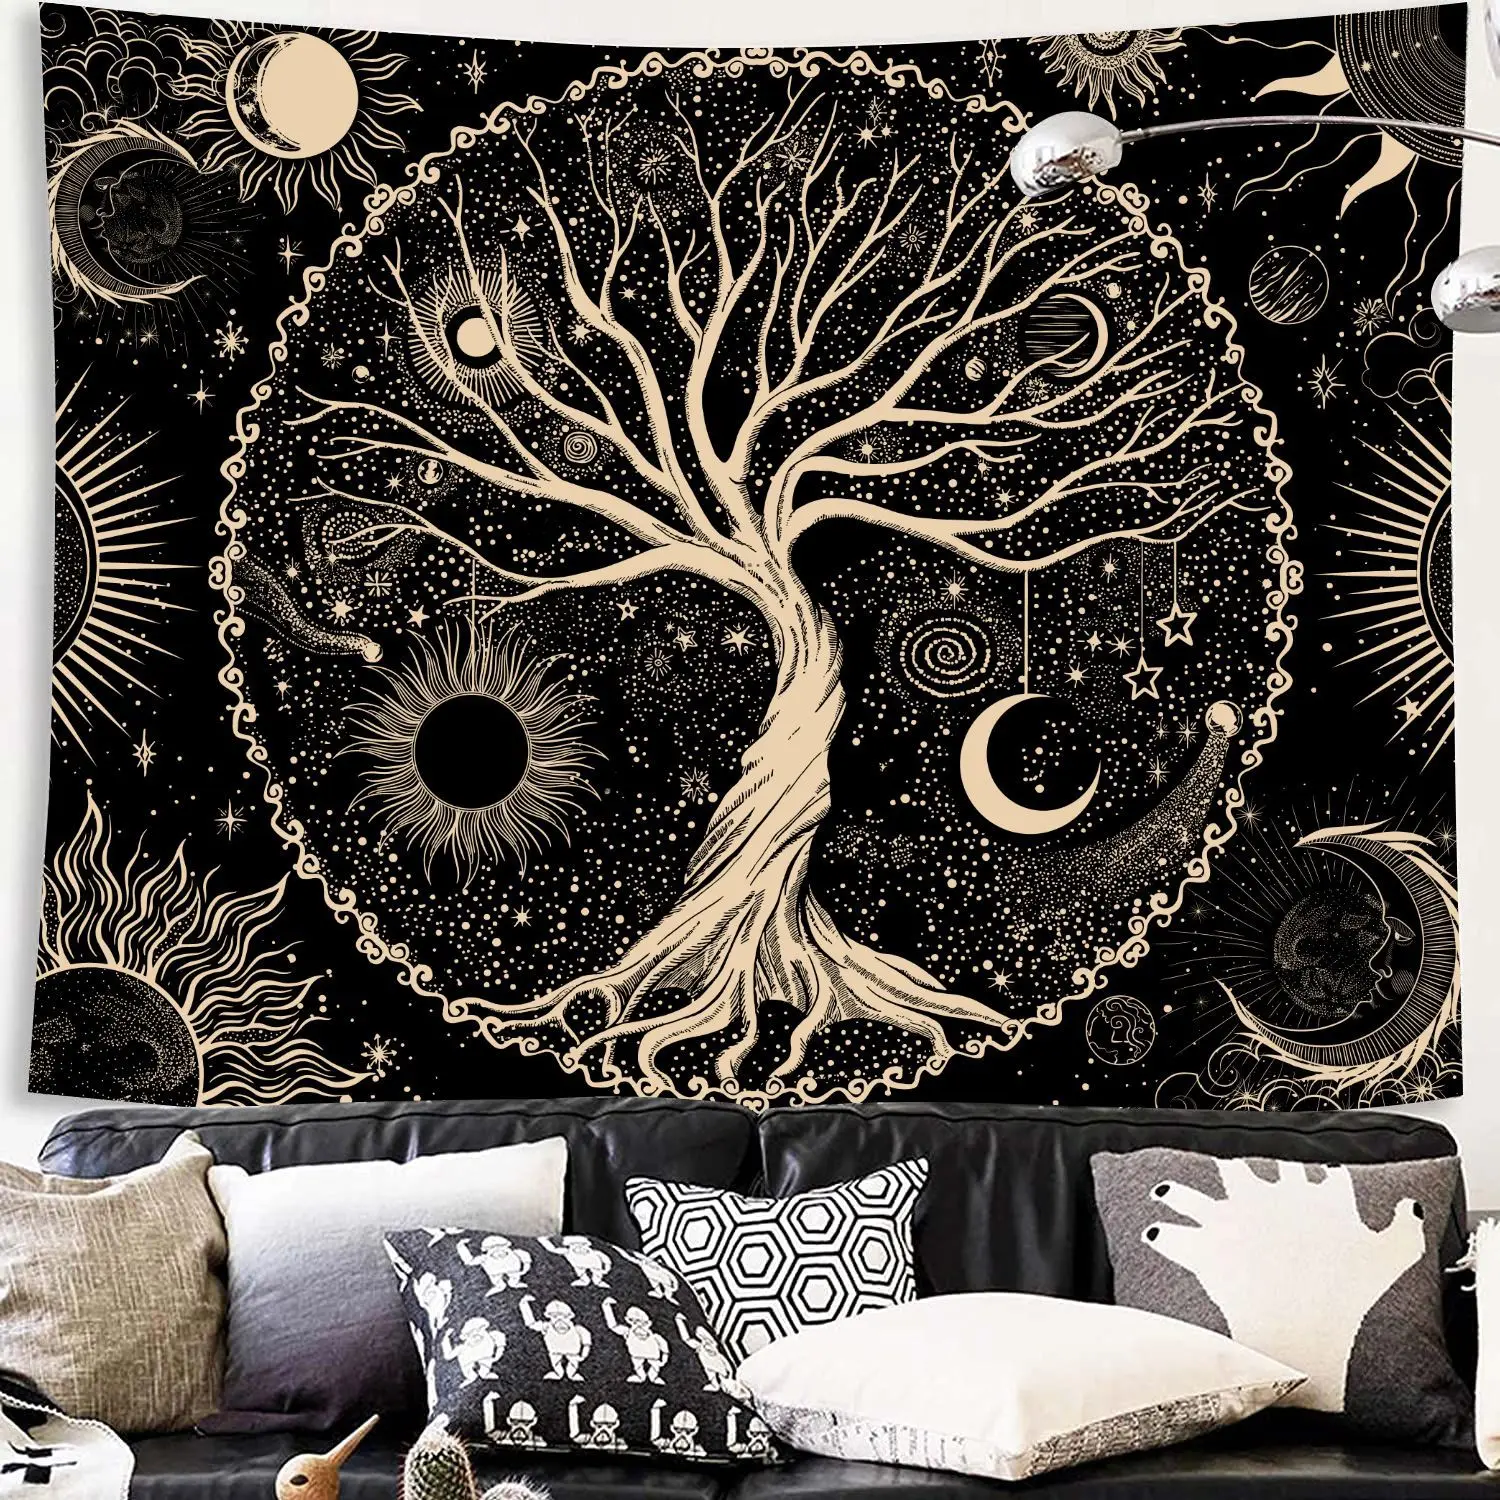 

Mystic Witchcraft Black And White Tree Of Life Tapestry Wall Hanging Psychedelic Wishing Tree Hippie Mandala Home Decor